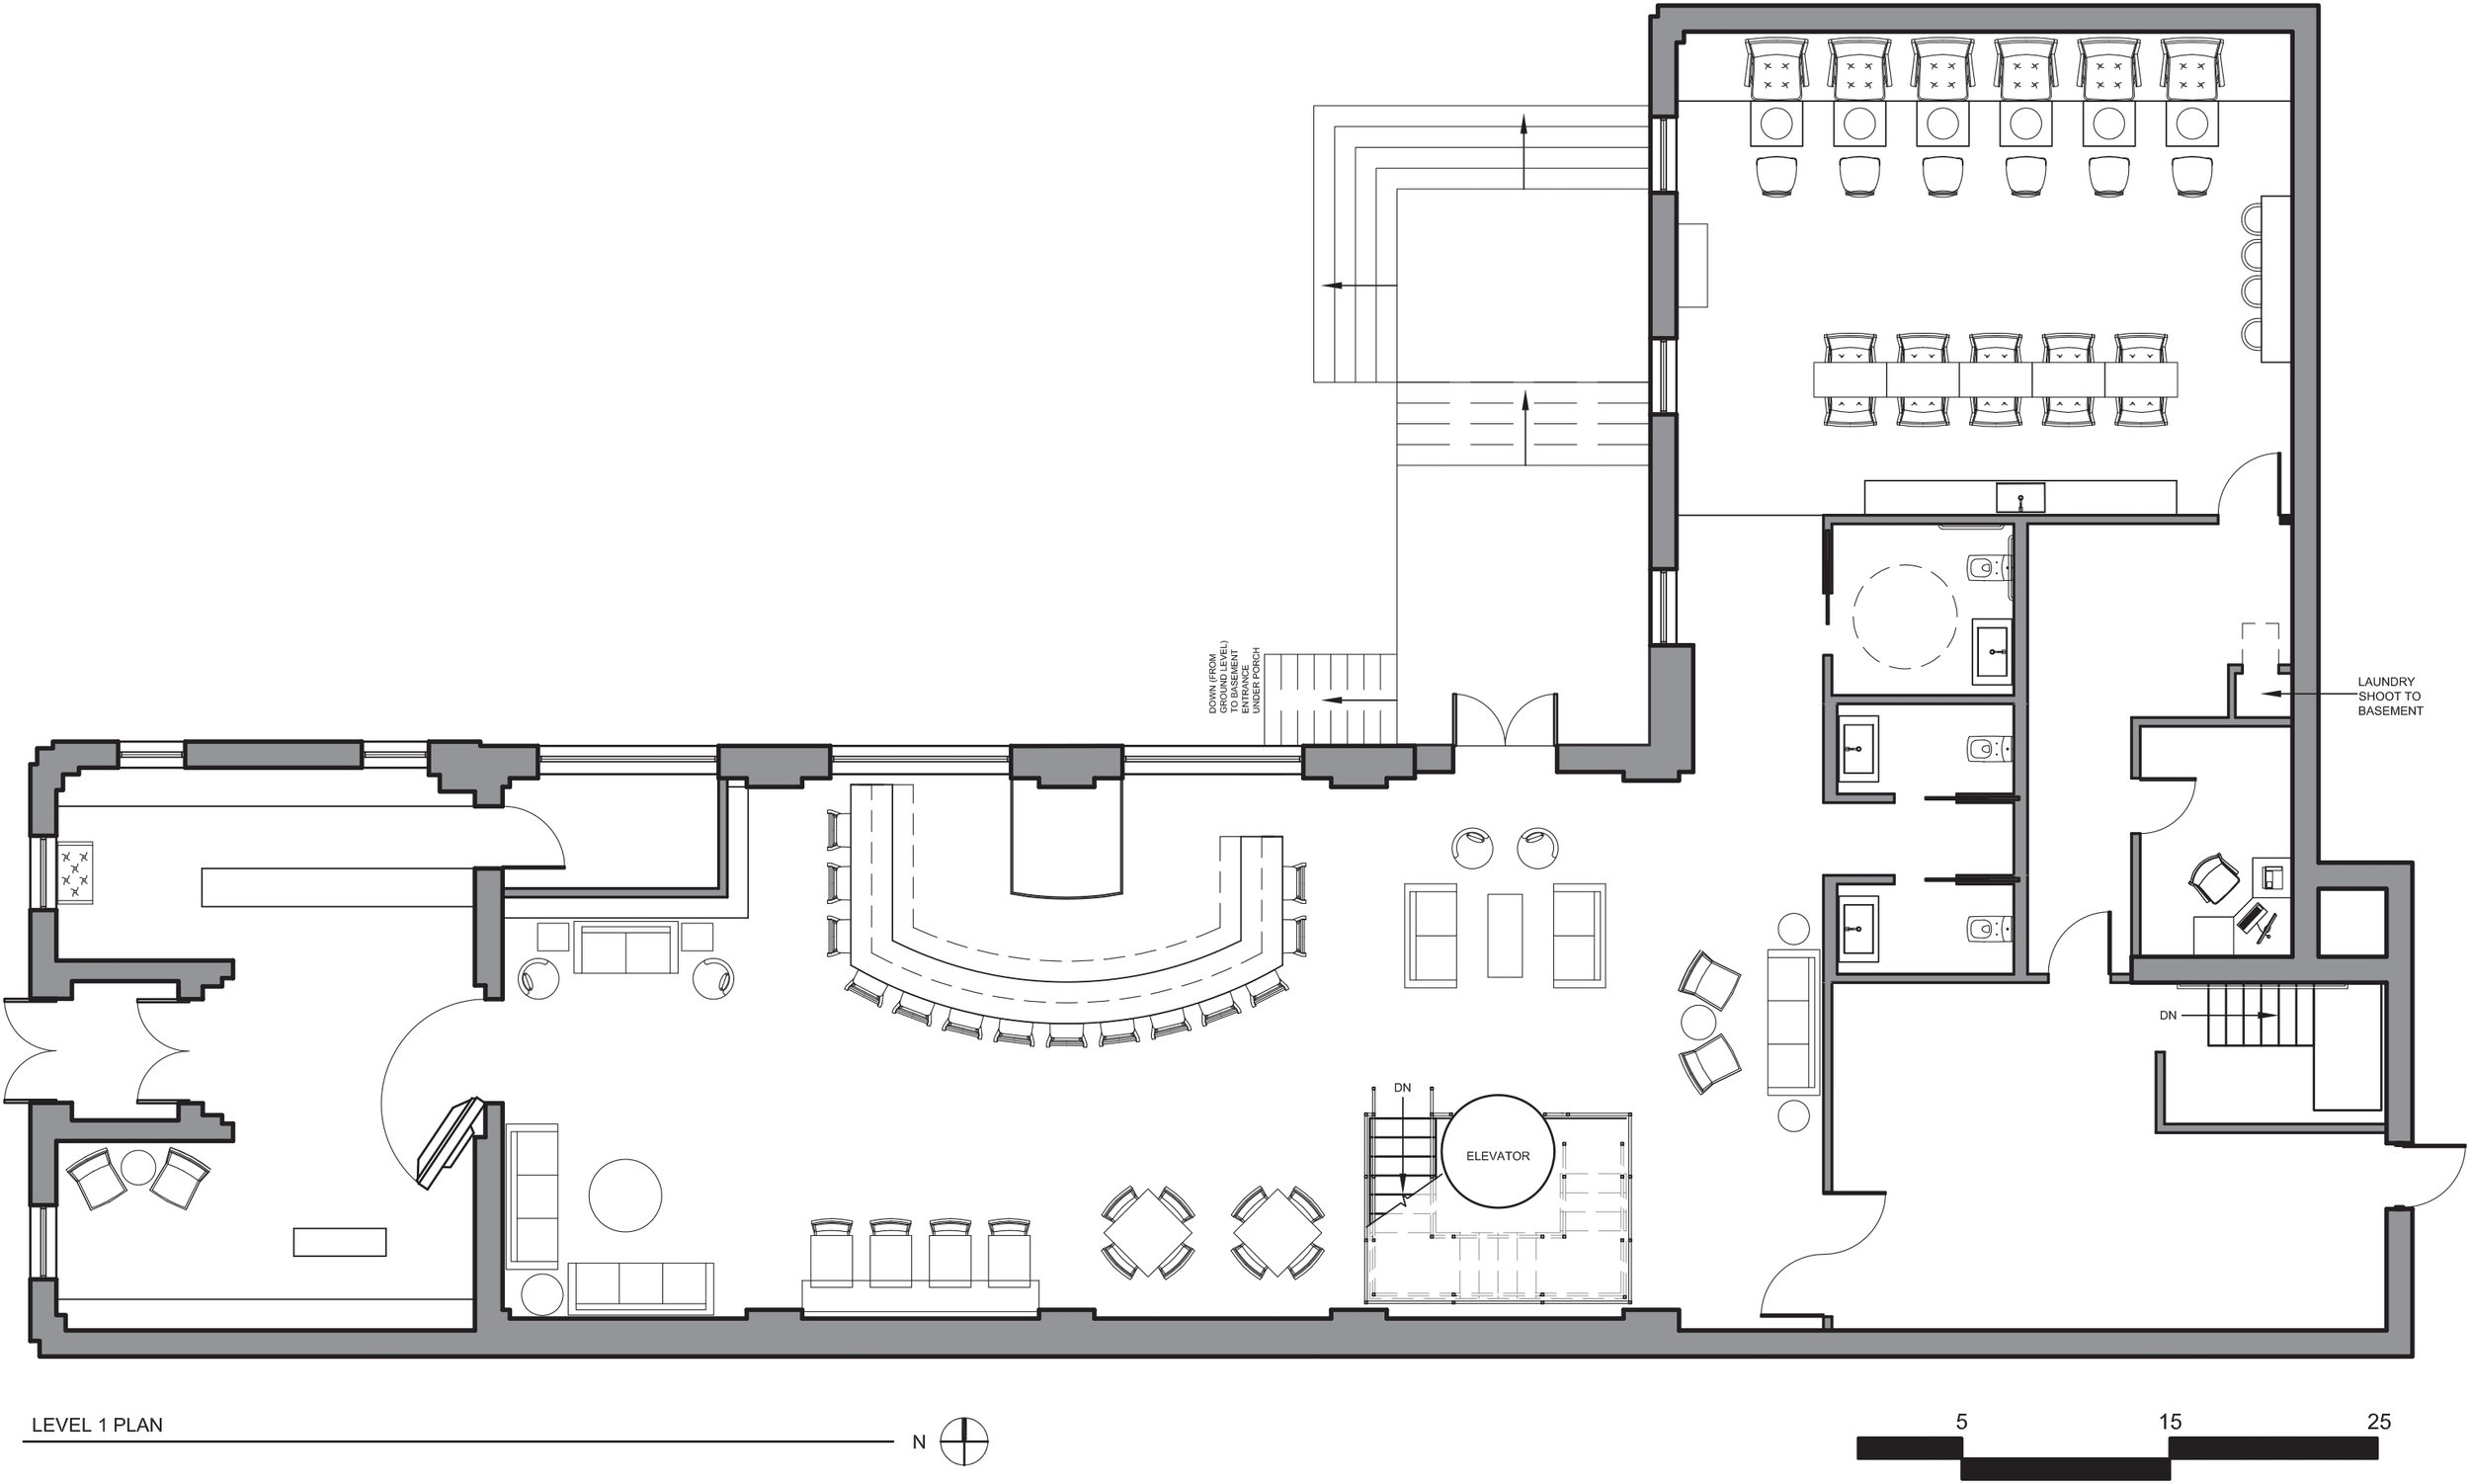 The Level 1 Floor Plan has distinct areas for retail, kitchen, and nail salon, as well as open dining lounge space